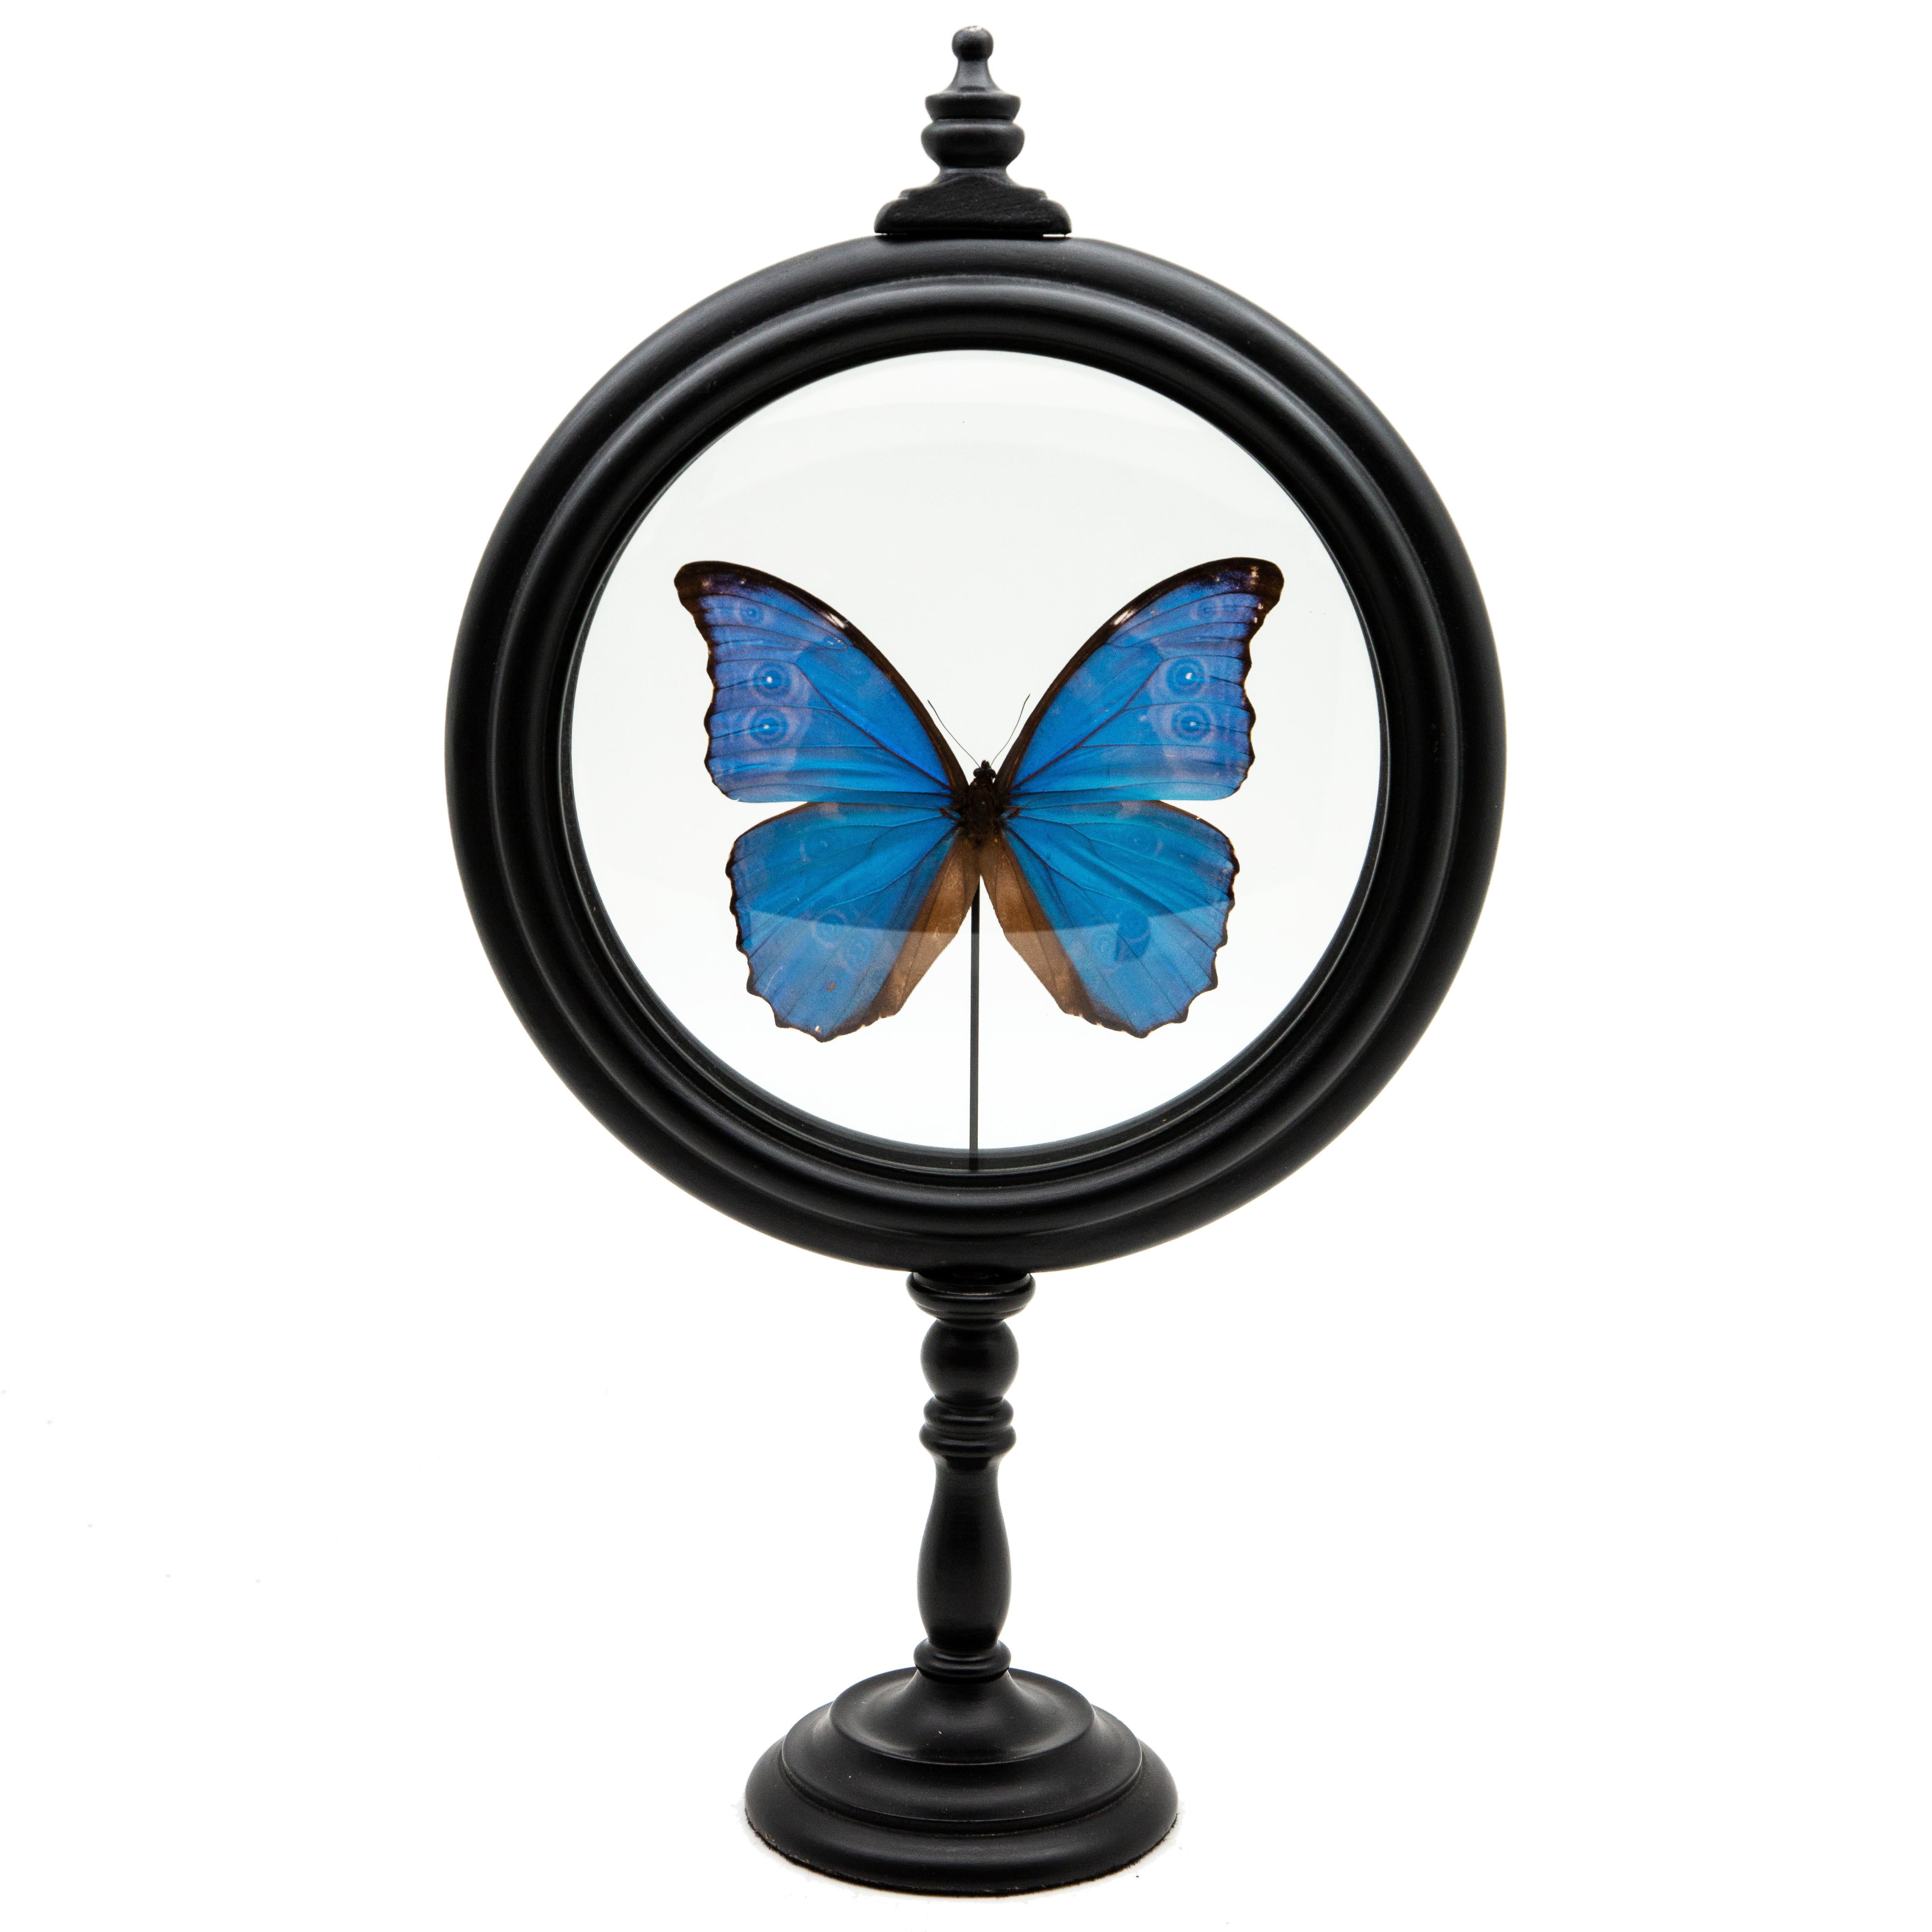 Blue butterfly in round reliquary. Morpho Didius butterfly mounted in France. Turned wood base with double glass. Electric blue butterfly (Morpho Didius) from South America in a reliquary with curved glasses. The back side of this butterfly has